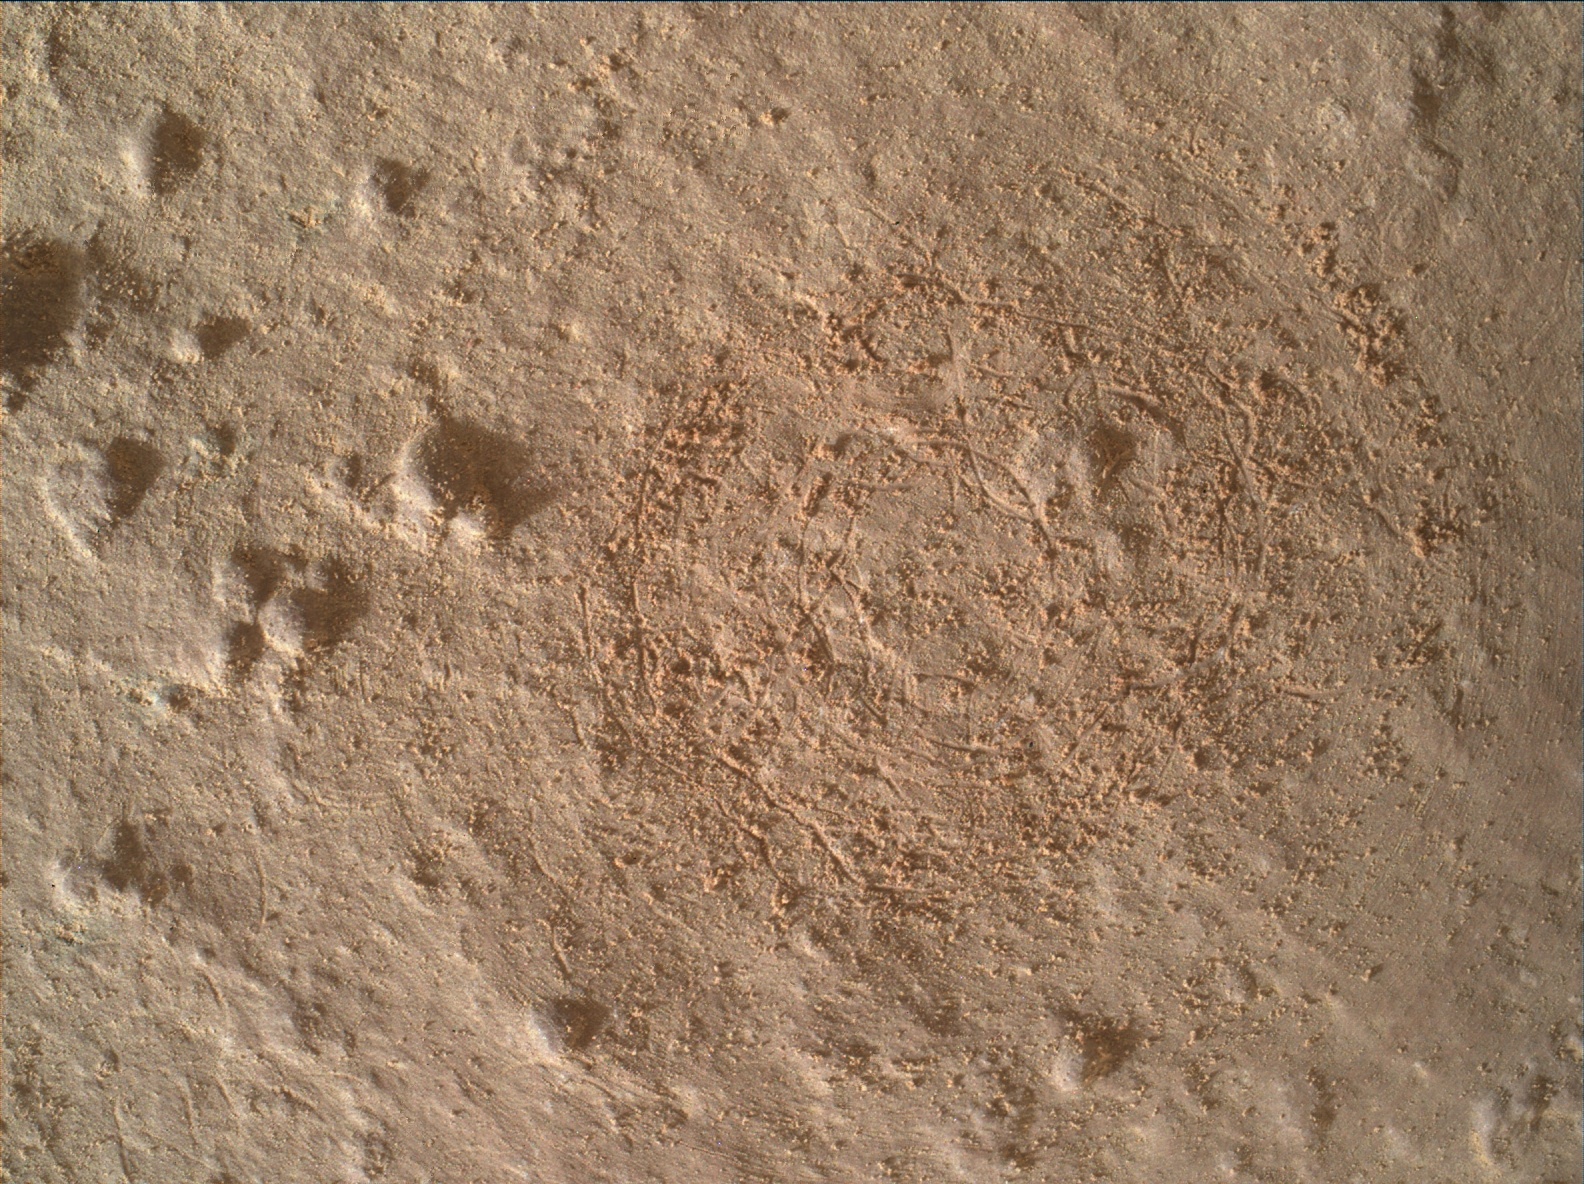 Nasa's Mars rover Curiosity acquired this image using its Mars Hand Lens Imager (MAHLI) on Sol 1445